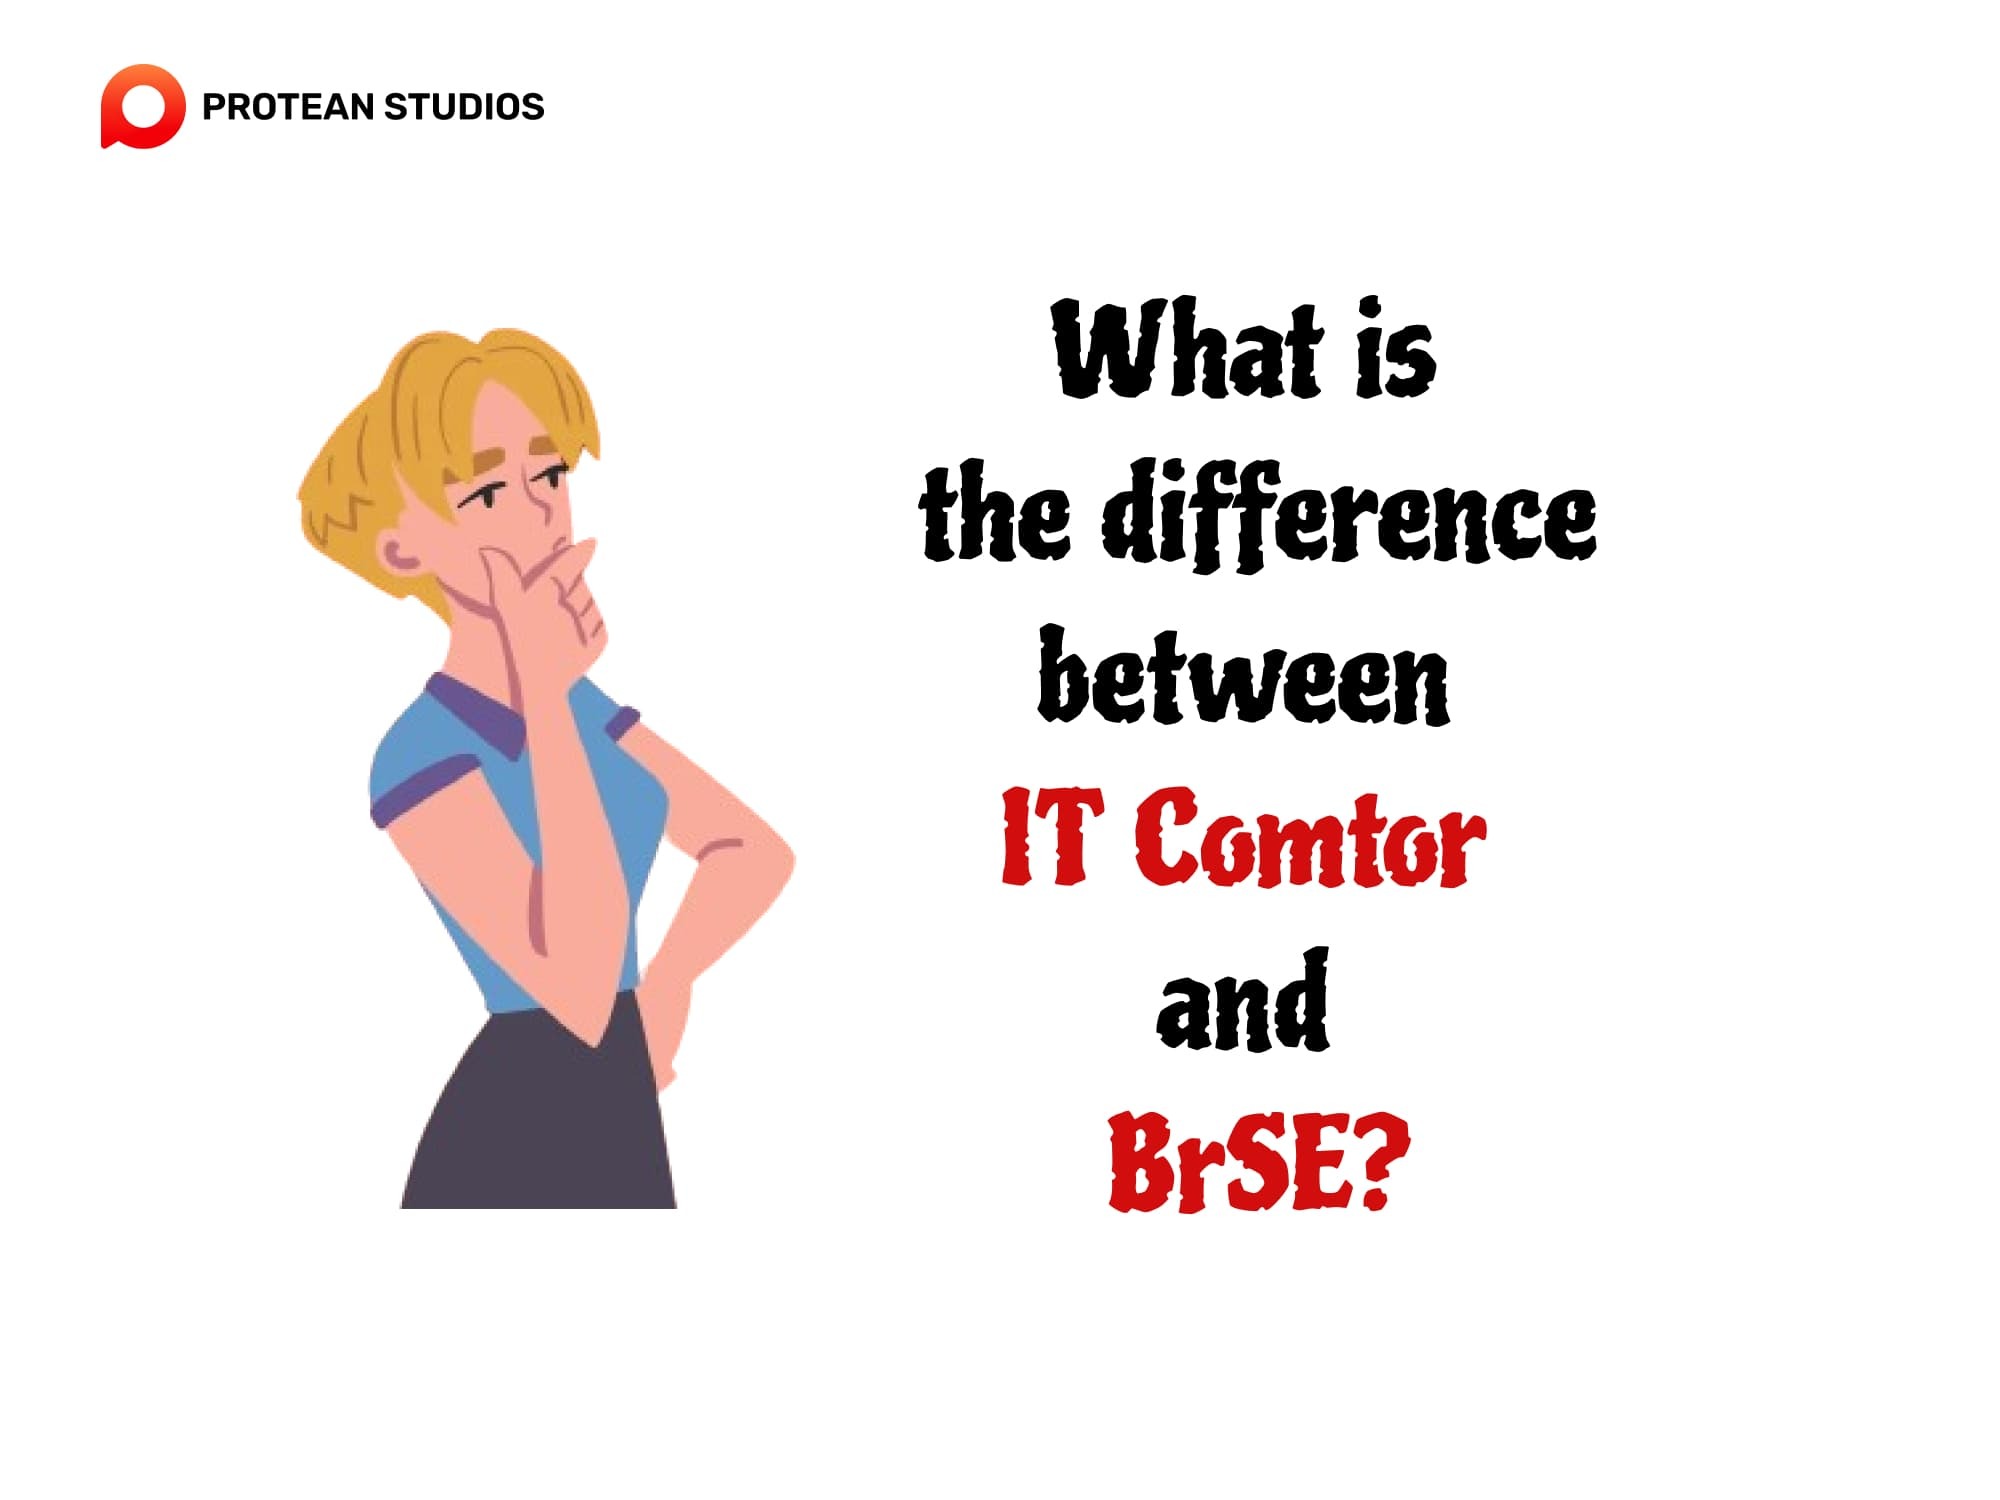 IT Comtor and BrSE have different specialties